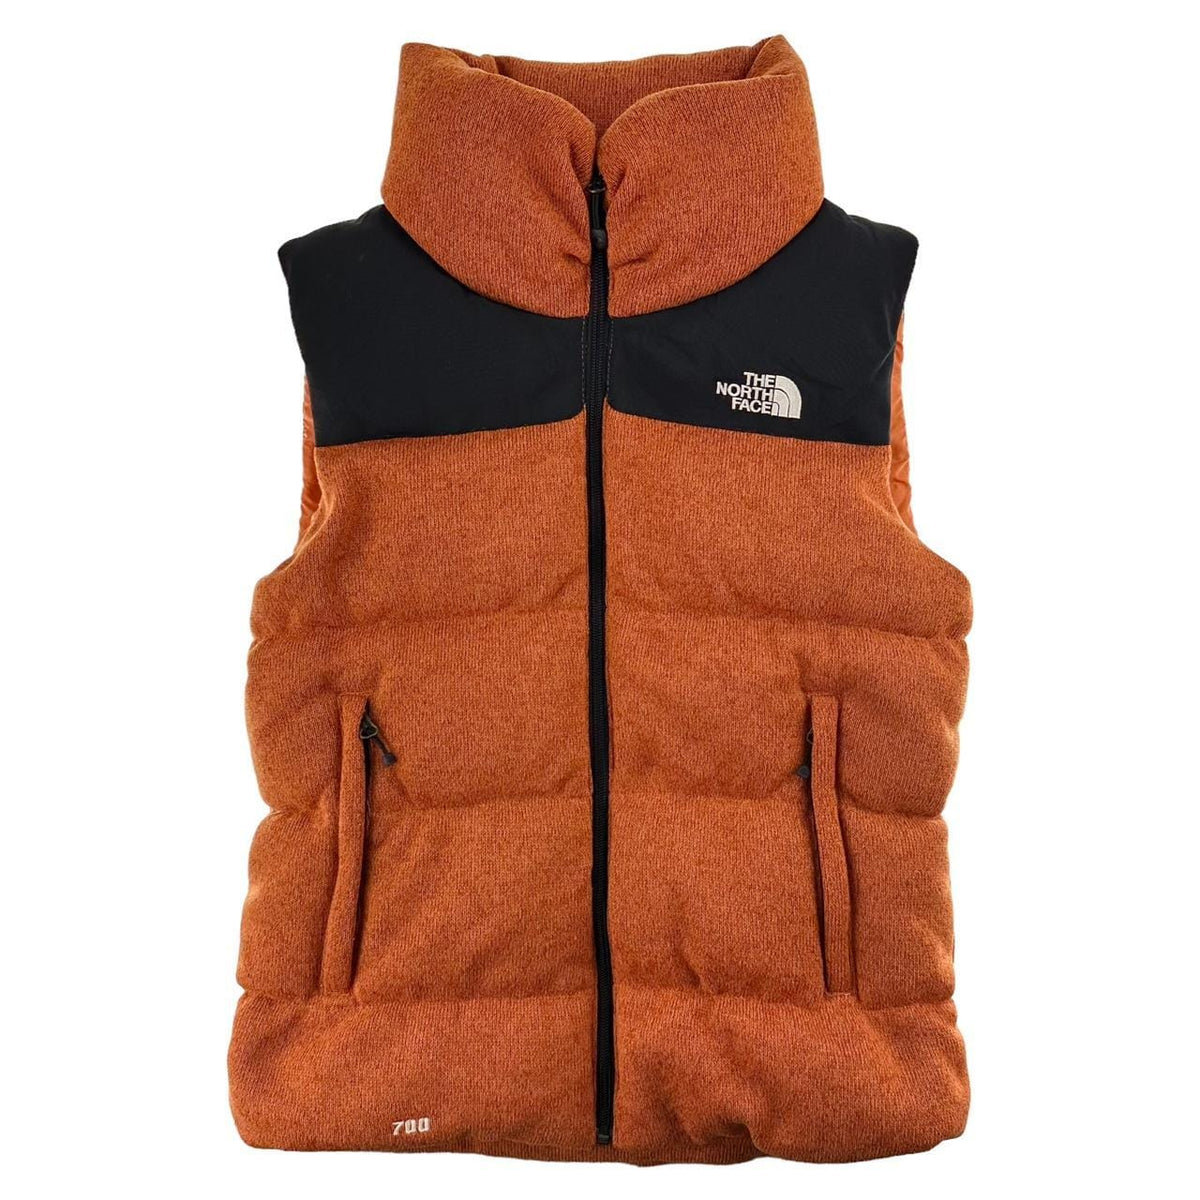 North Face gilet woman’s size M